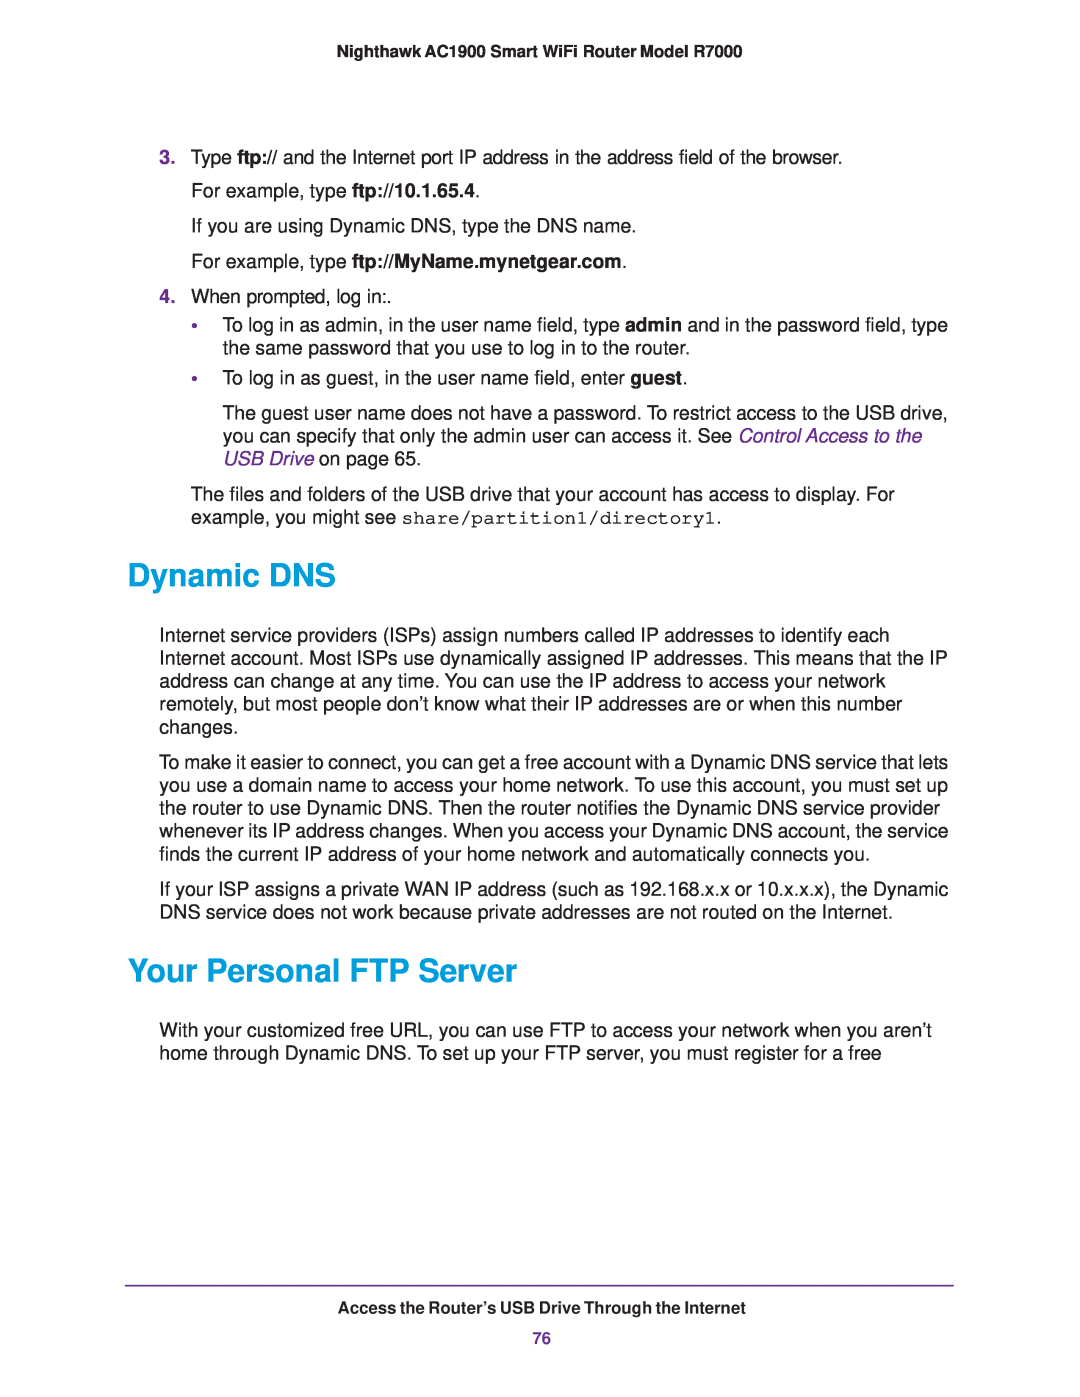 NETGEAR R7000 user manual Dynamic DNS, Your Personal FTP Server 